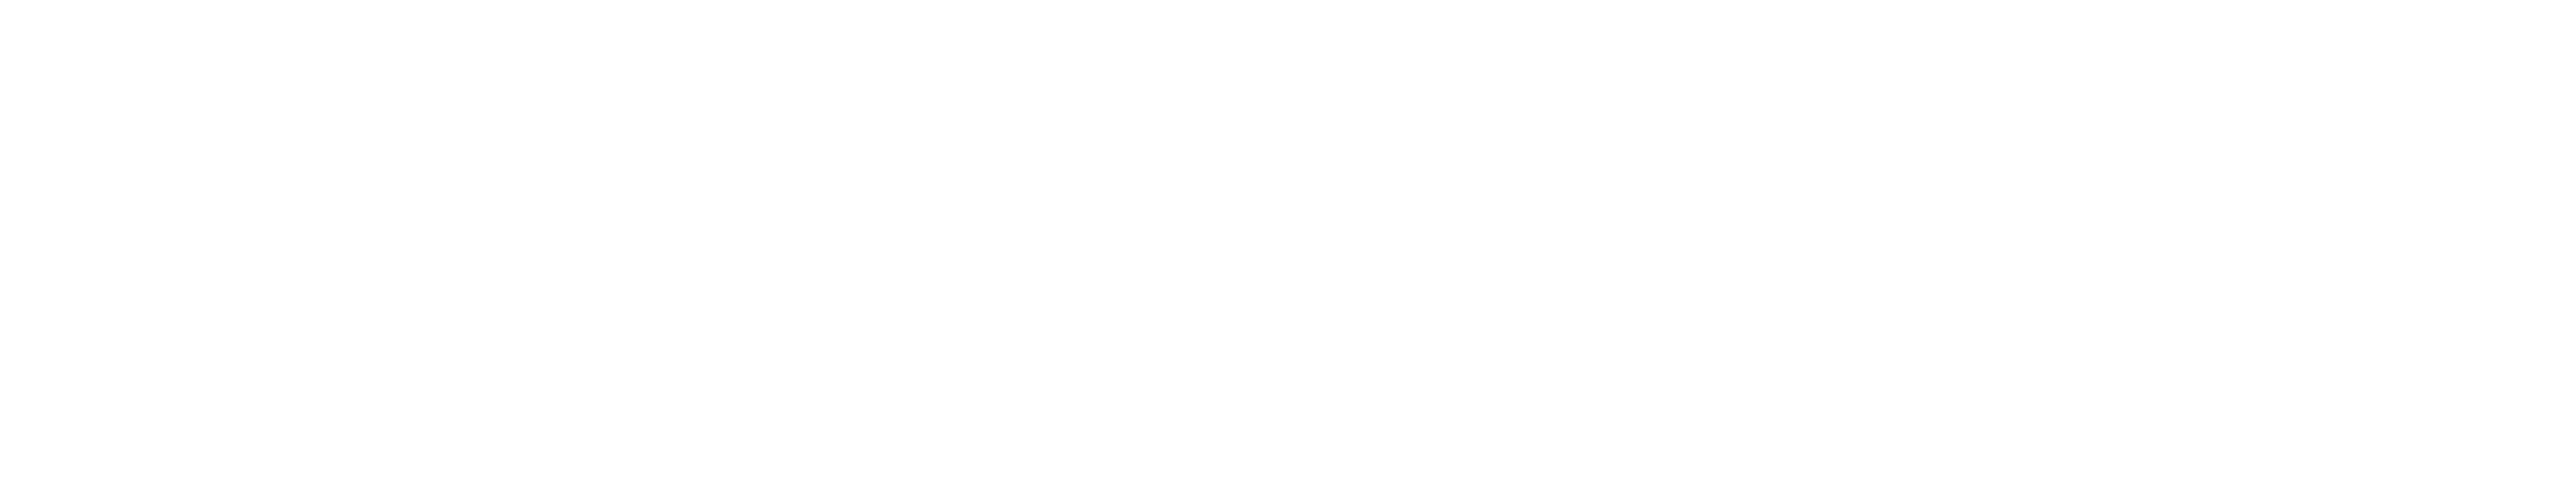 ArchiveSocial powered by CivicPlus logo in white